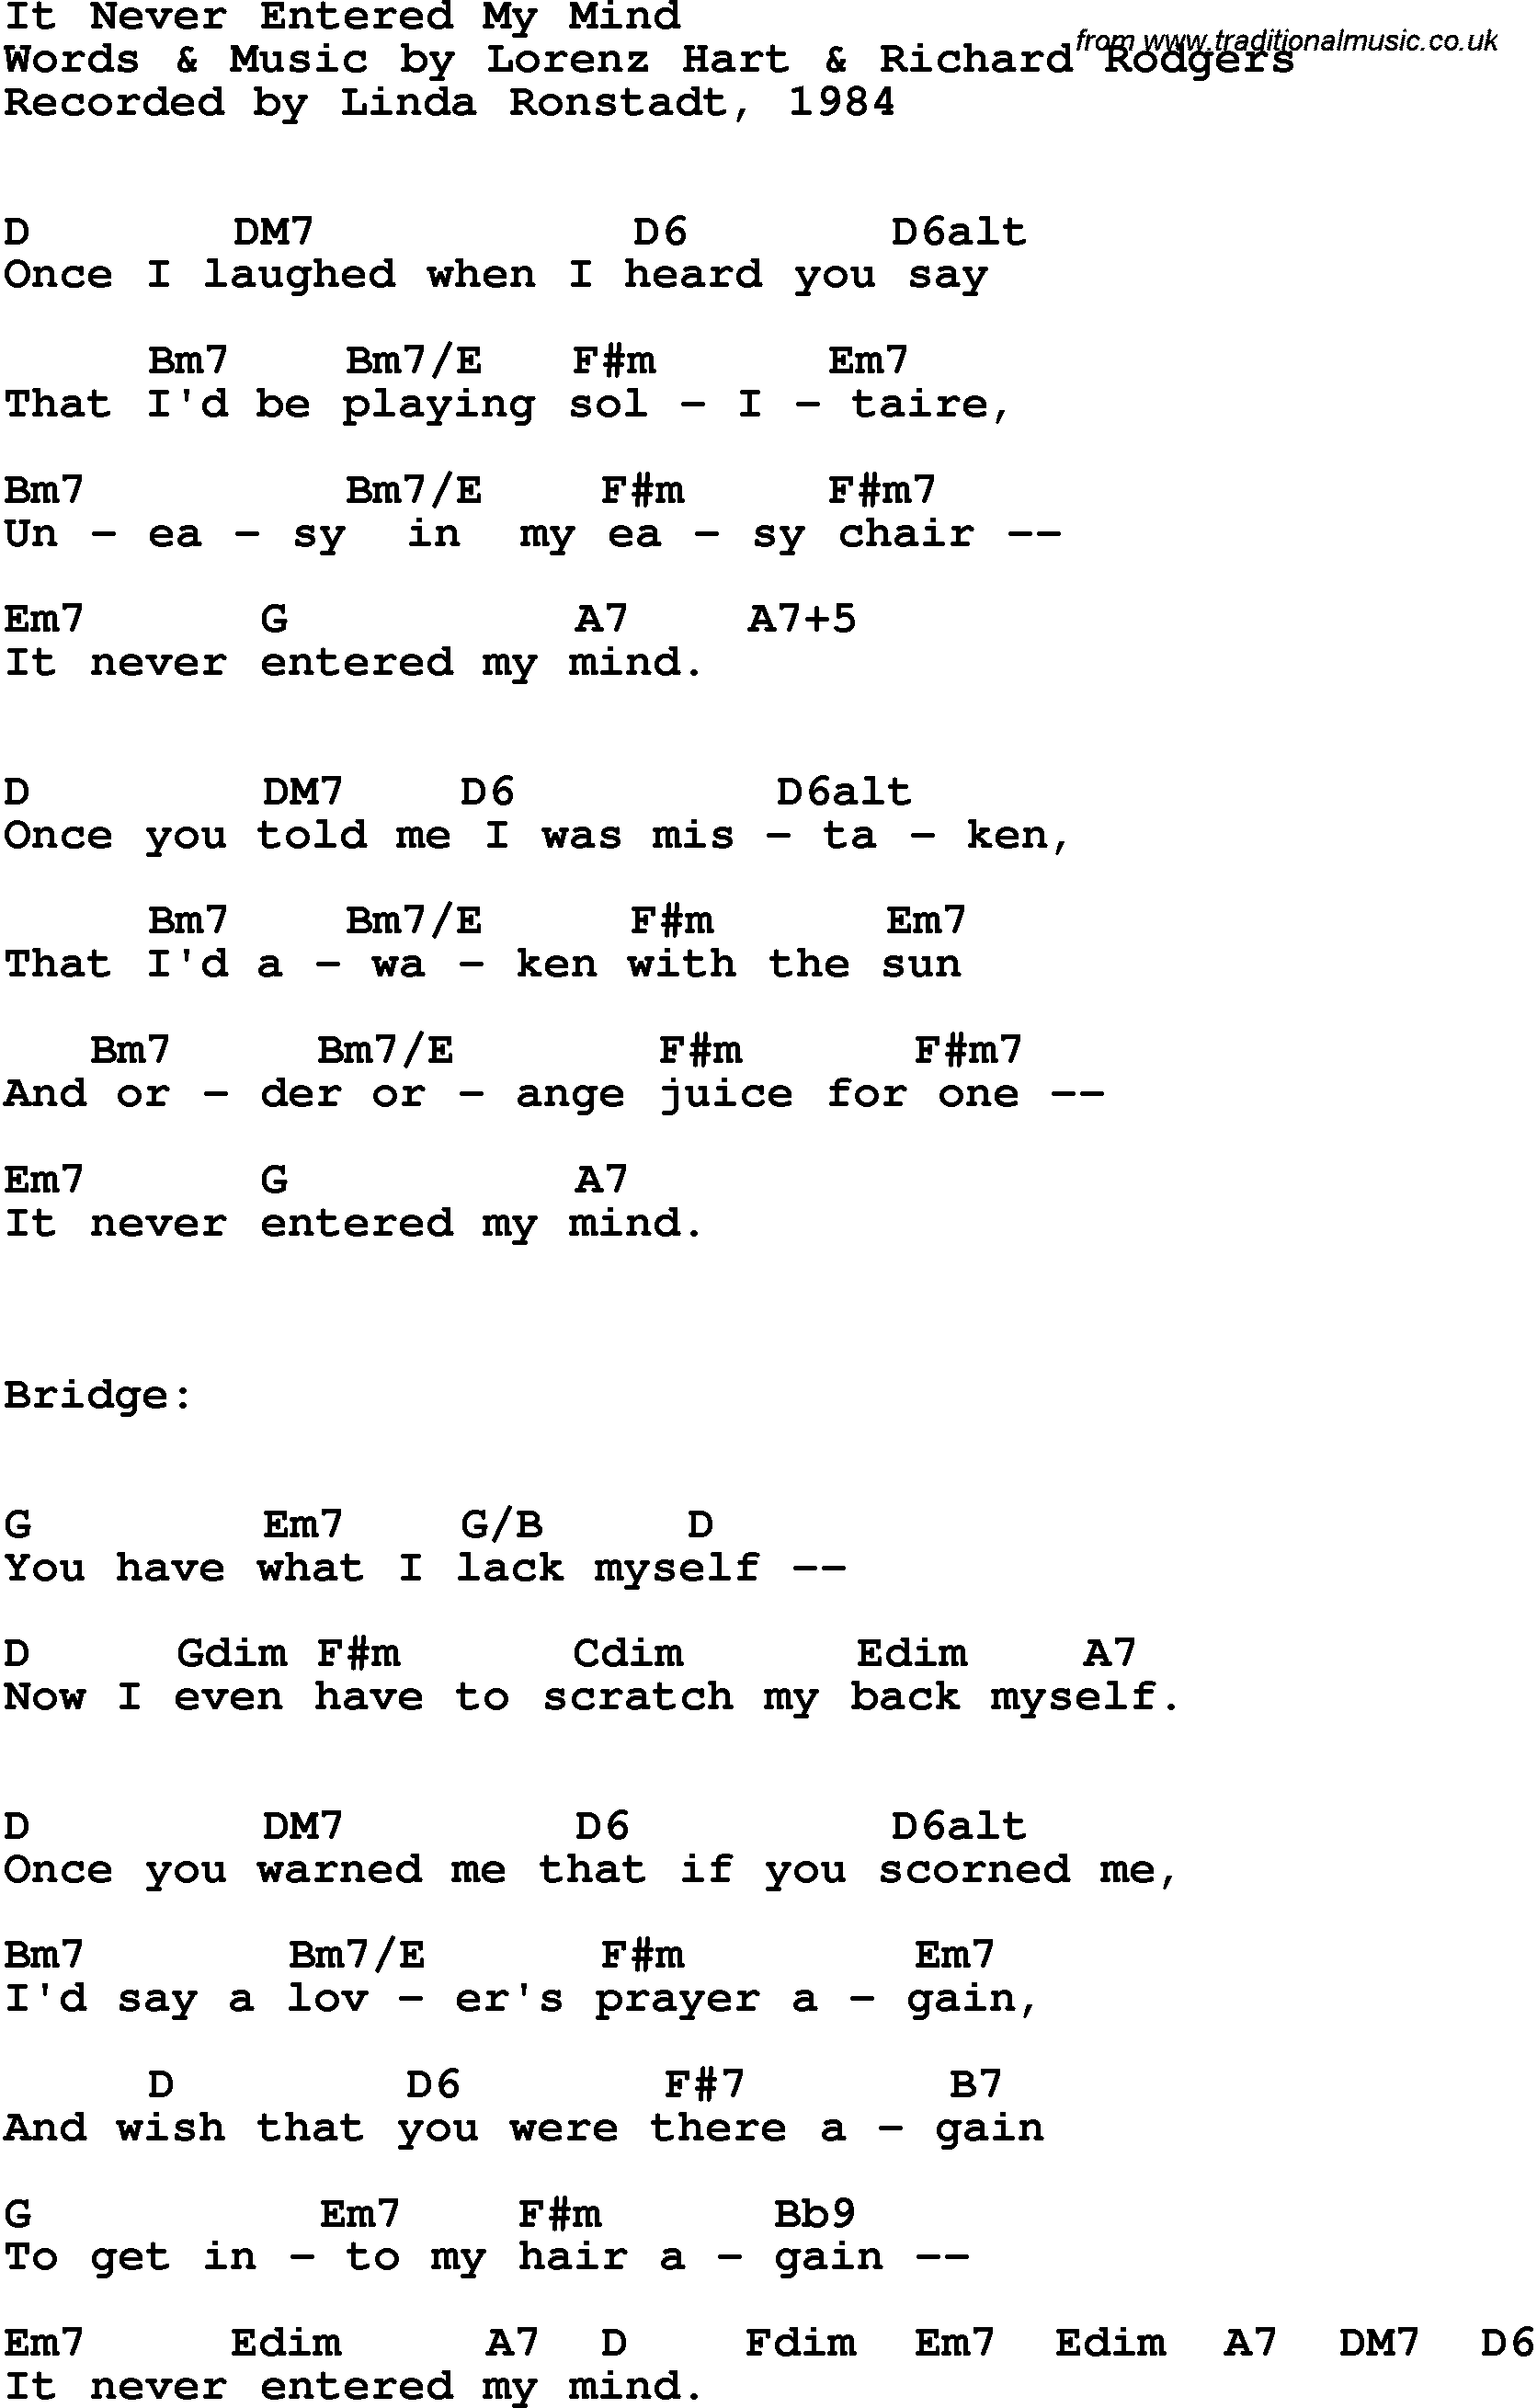 Song Lyrics with guitar chords for It Never Entered My Mind - Linda Ronstadt, 1984